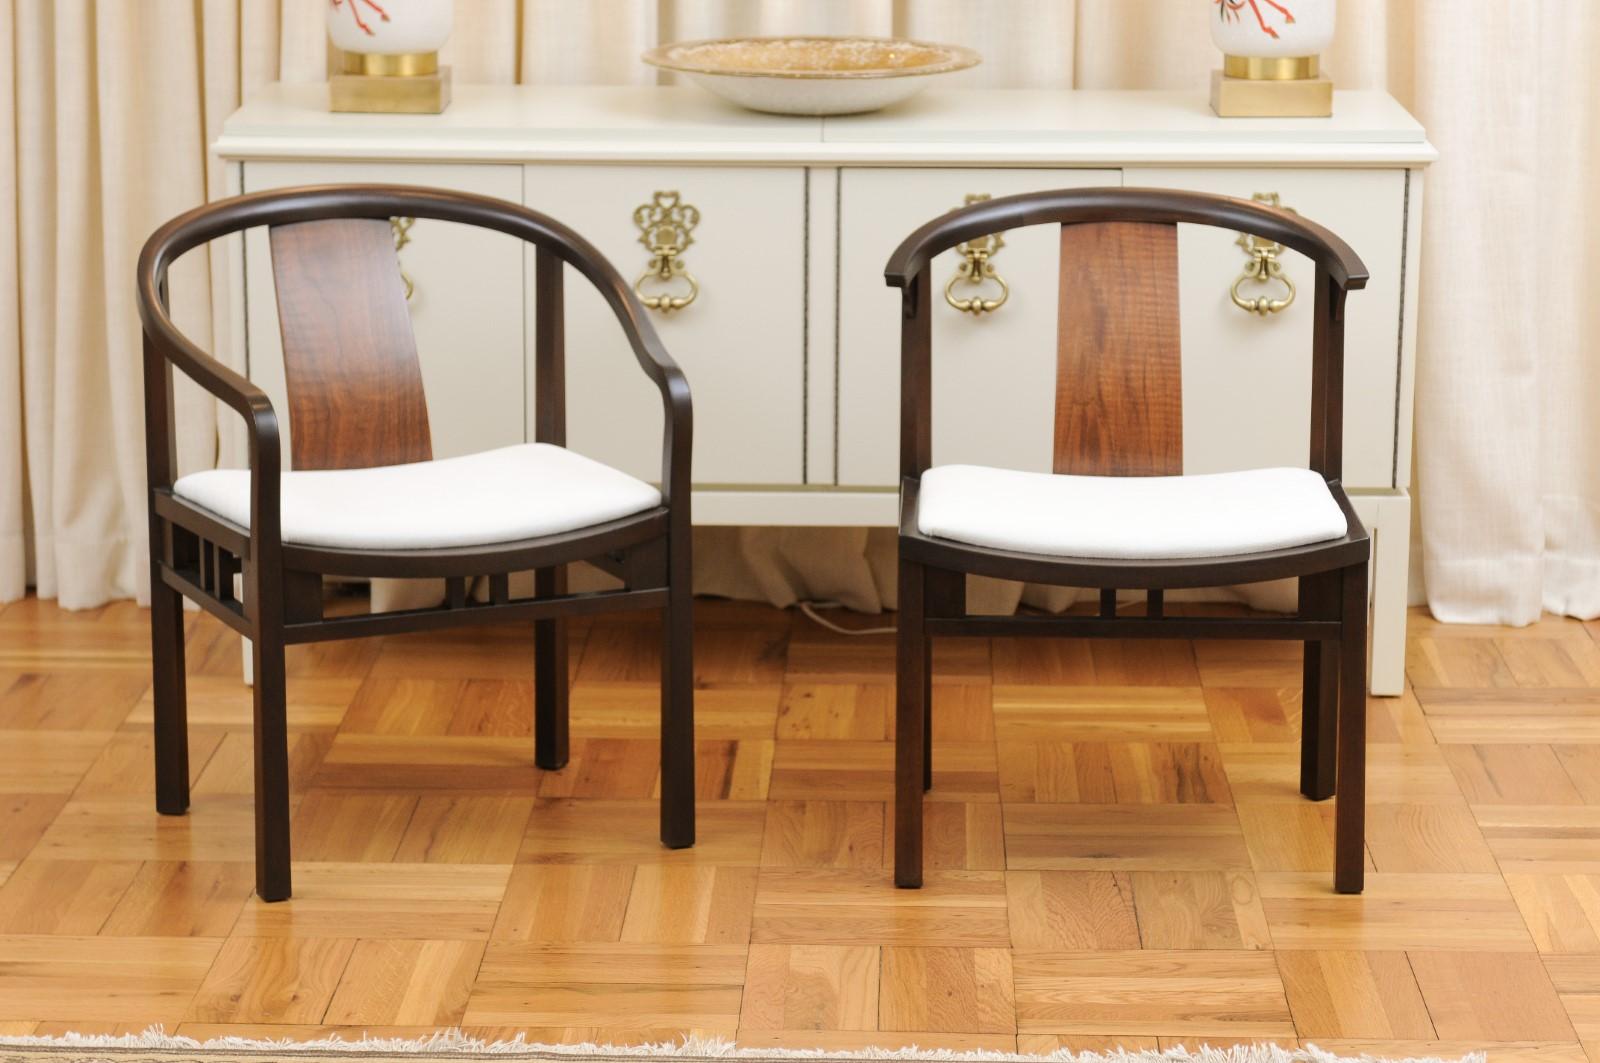 These magnificent dining chairs are shipped as professionally photographed and described in the listing narrative: Meticulously professionally restored and installation ready. This set is unique on the World market. Seats may be caned if desired.